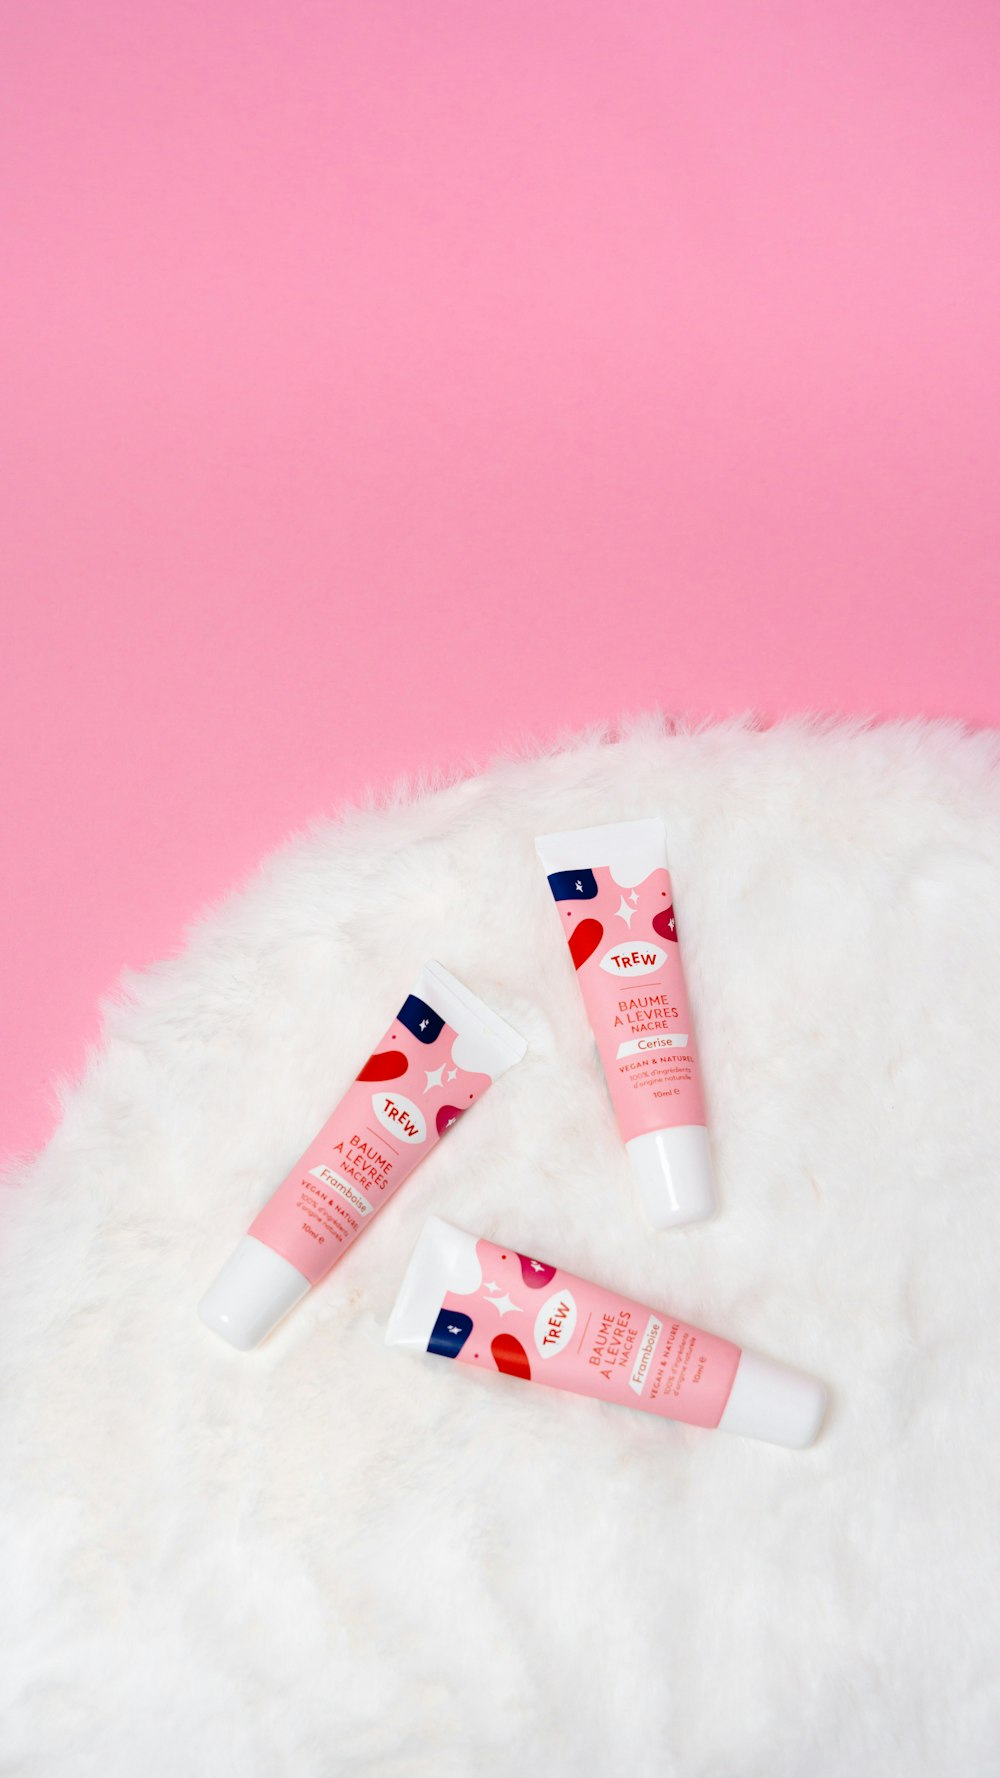 three tubes of hand cream sitting on a white fluffy surface